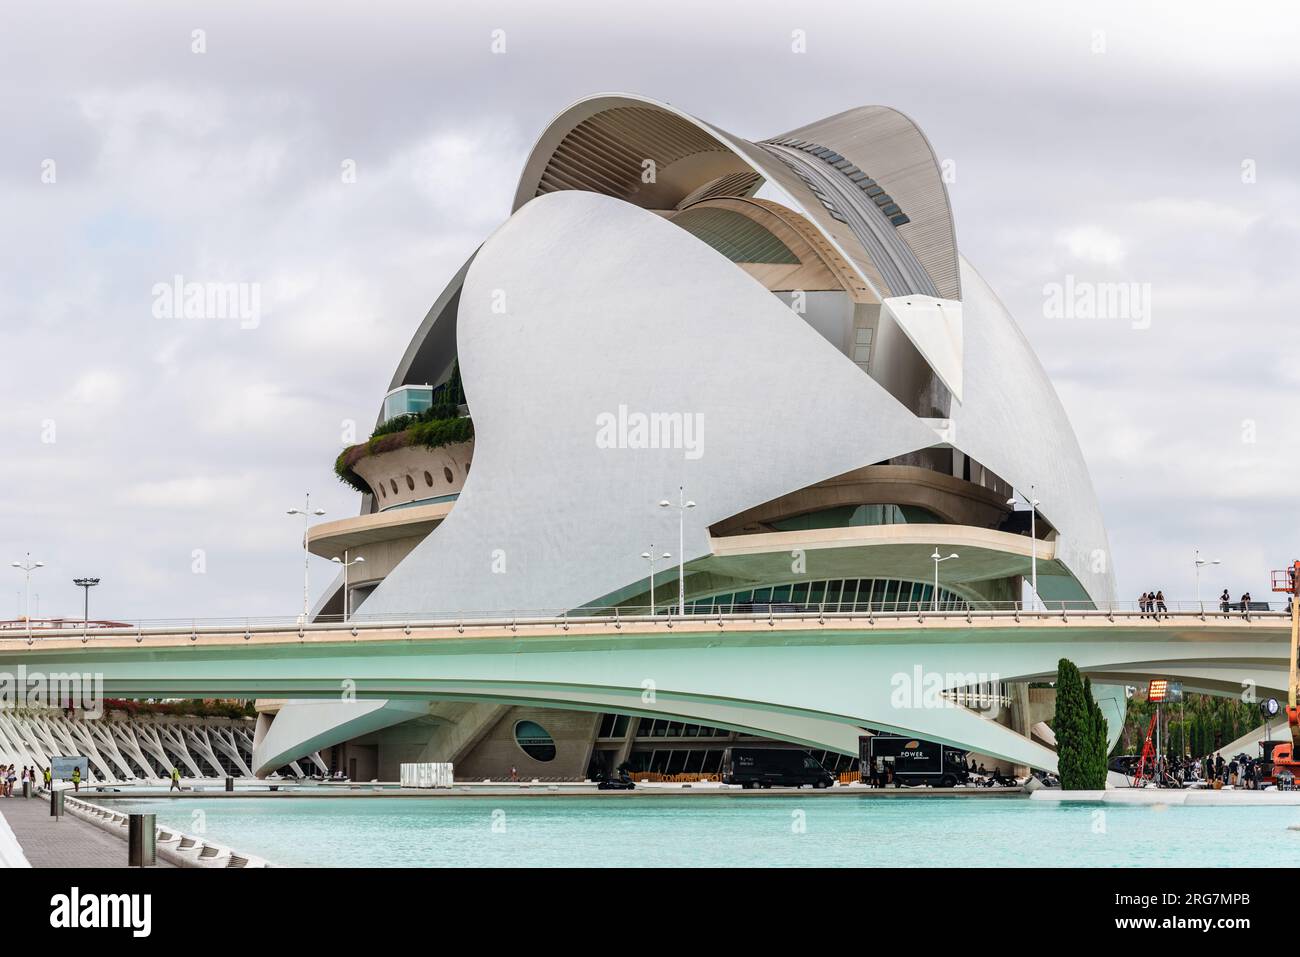 Valencia, Spain - July 29, 2023: View of Palau de les Arts Reina Sofia in Valencia in the City of Arts and Sciences. It was designed by famous Spanish Stock Photo